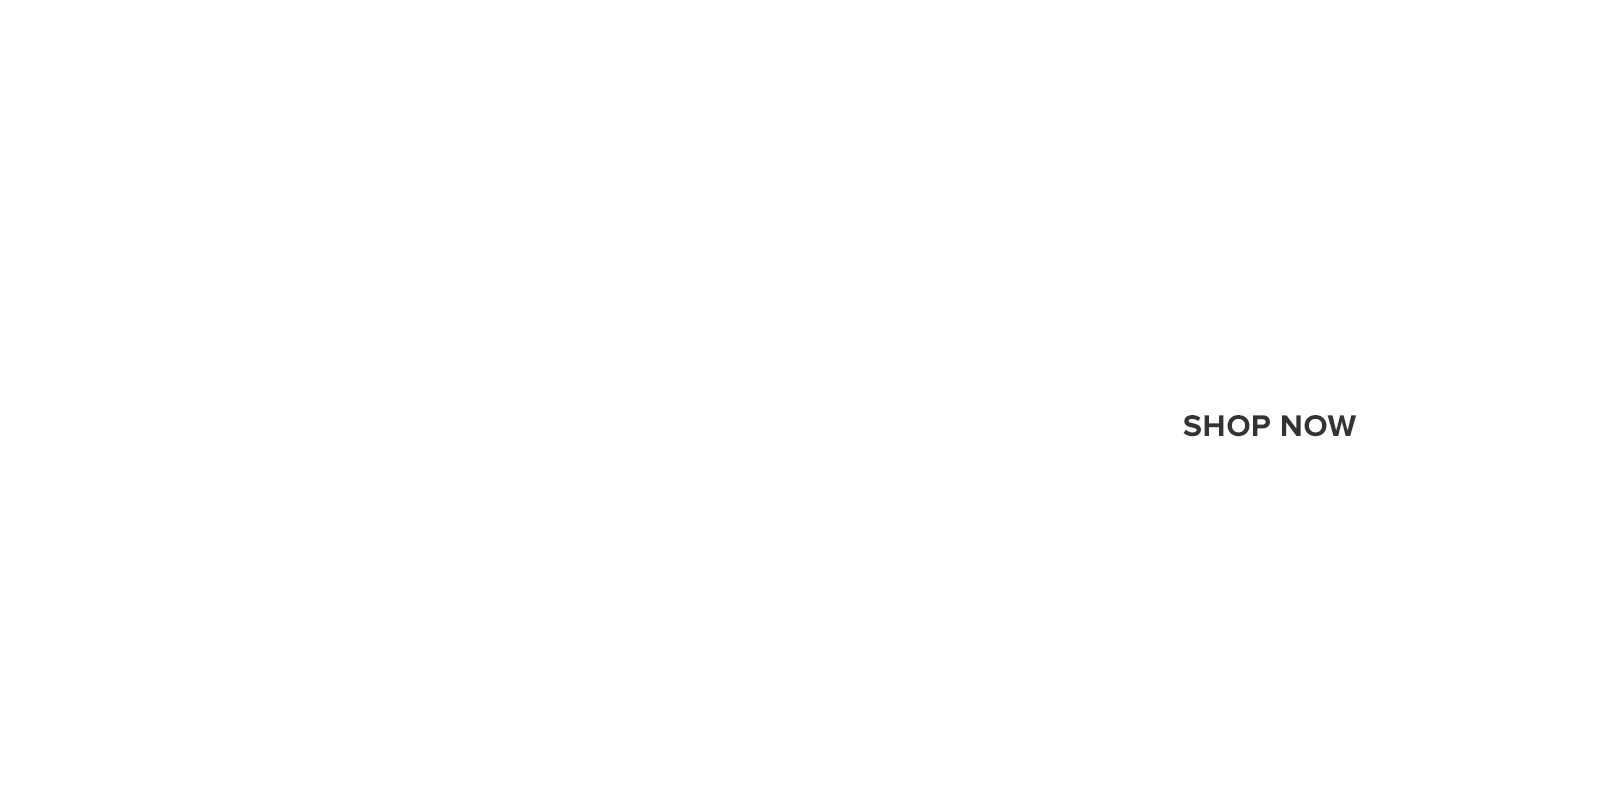 22% off sitewide